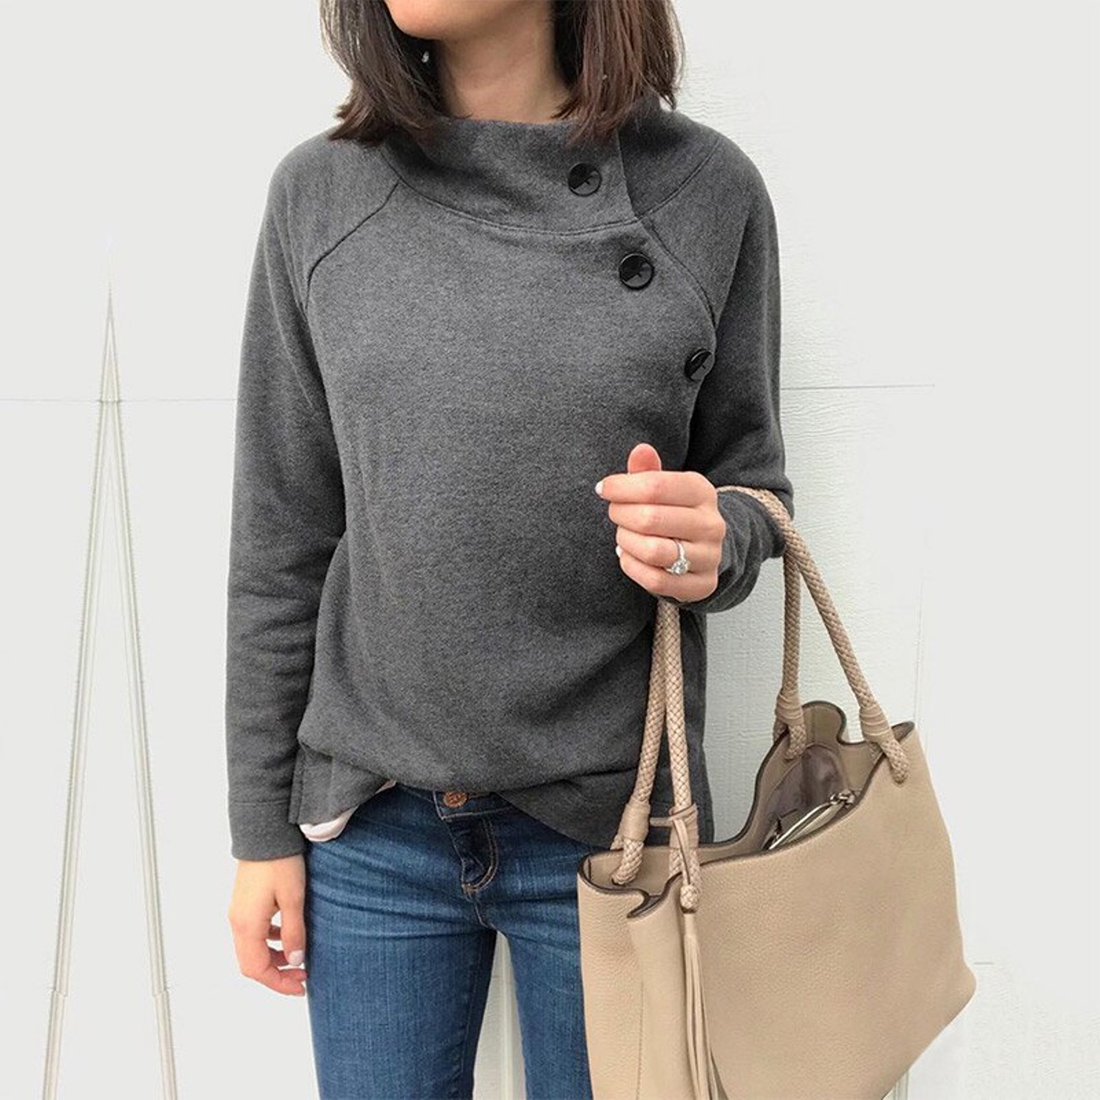 Women's Autumn Casual Solid Sweatshirt With Buttons